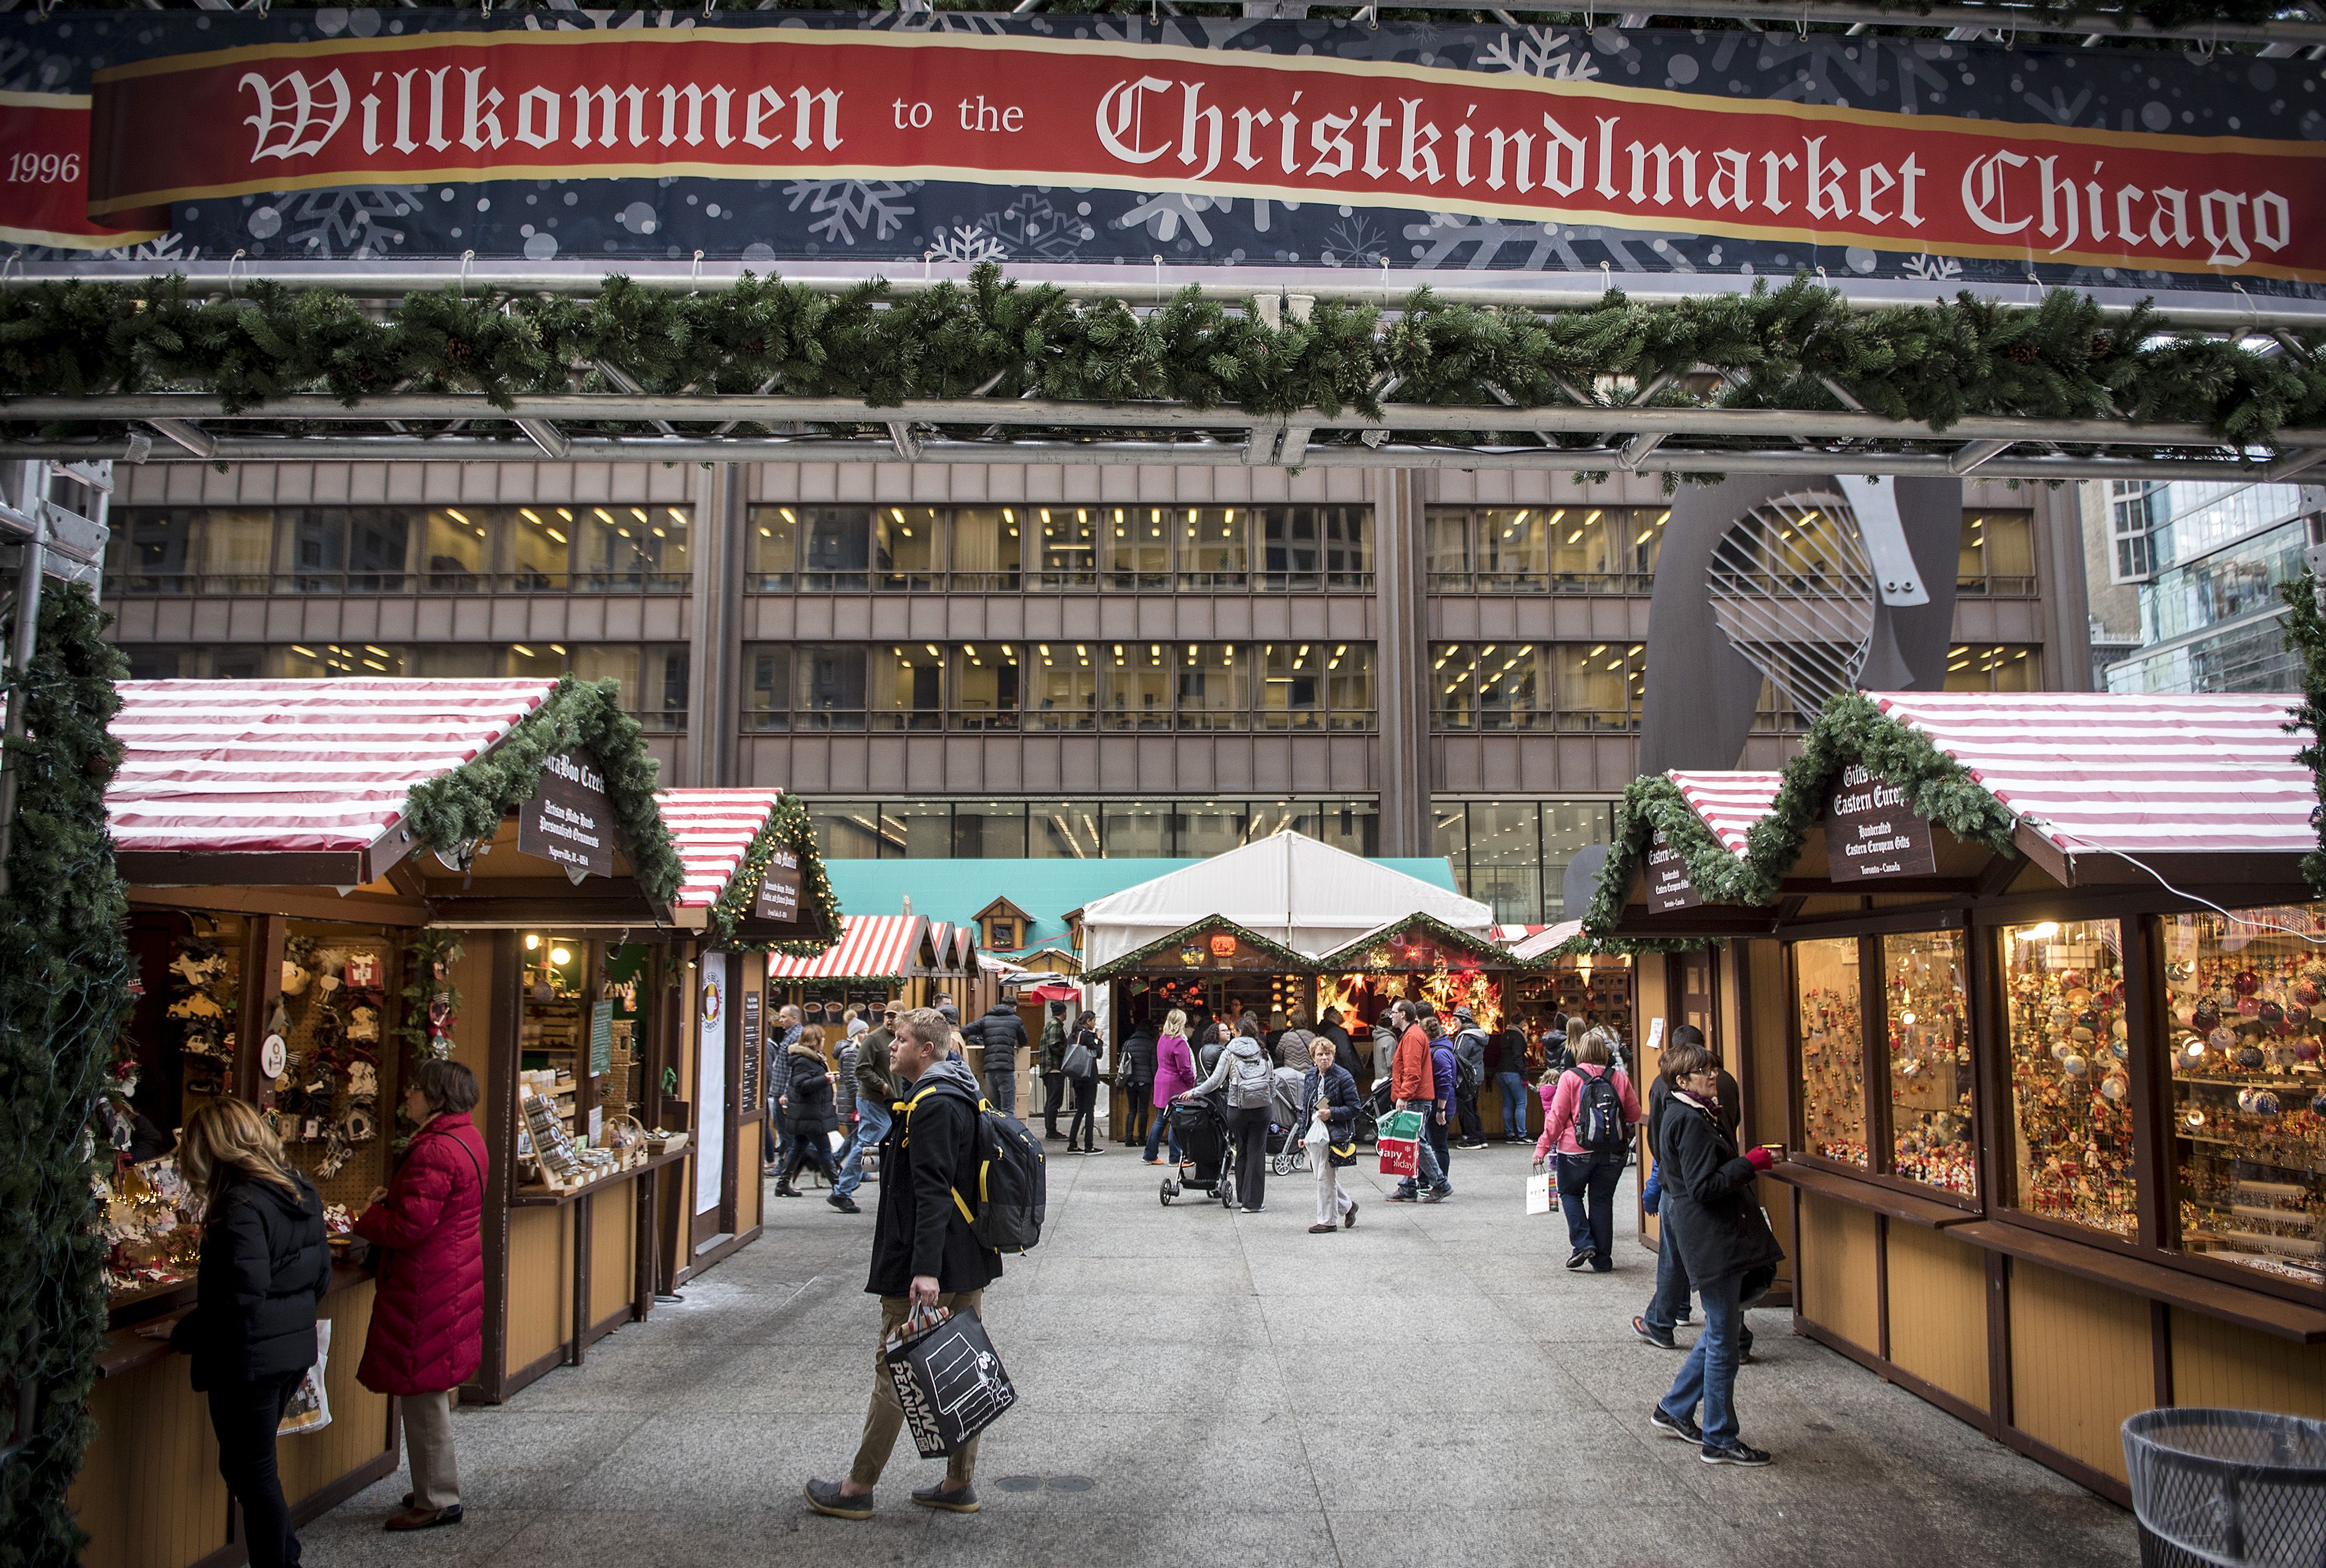 The Christkindlmarket Chicago 2017. Photo: Christopher Dilts/Bloomberg via Getty Images